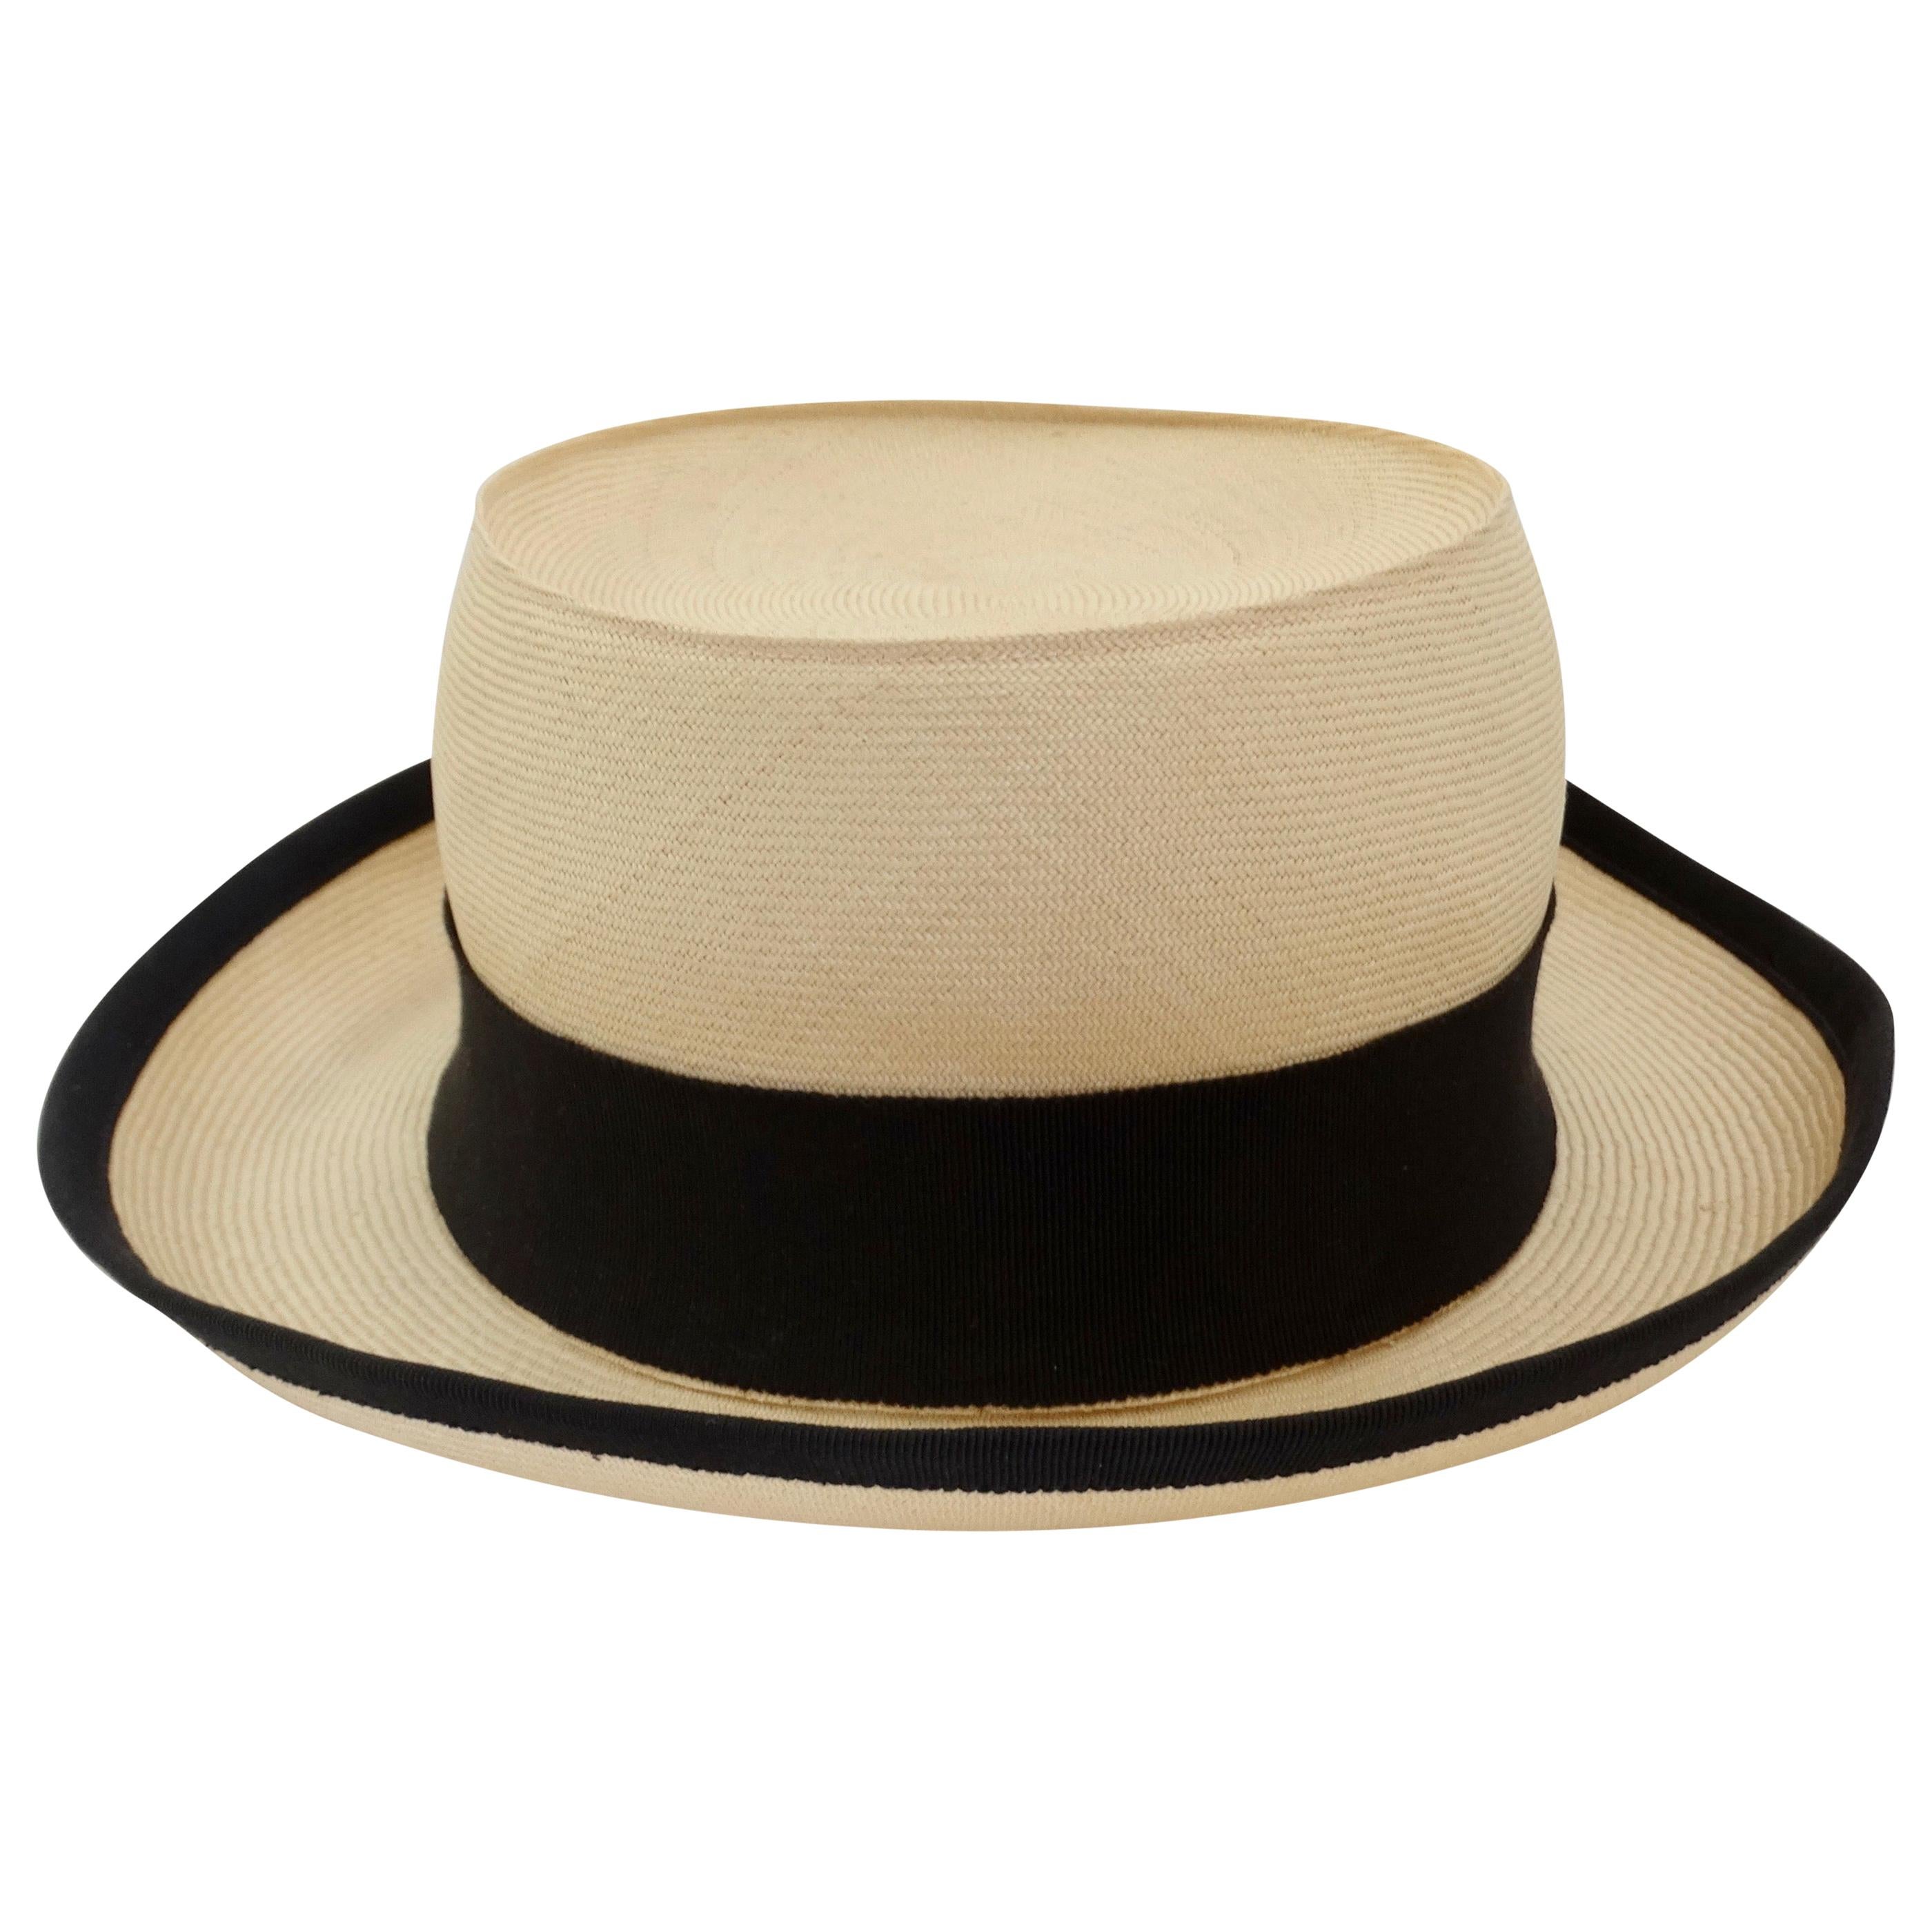 Vintage Straw Boater Hat Coco Chanel by payMeNpeonies on , $105.00